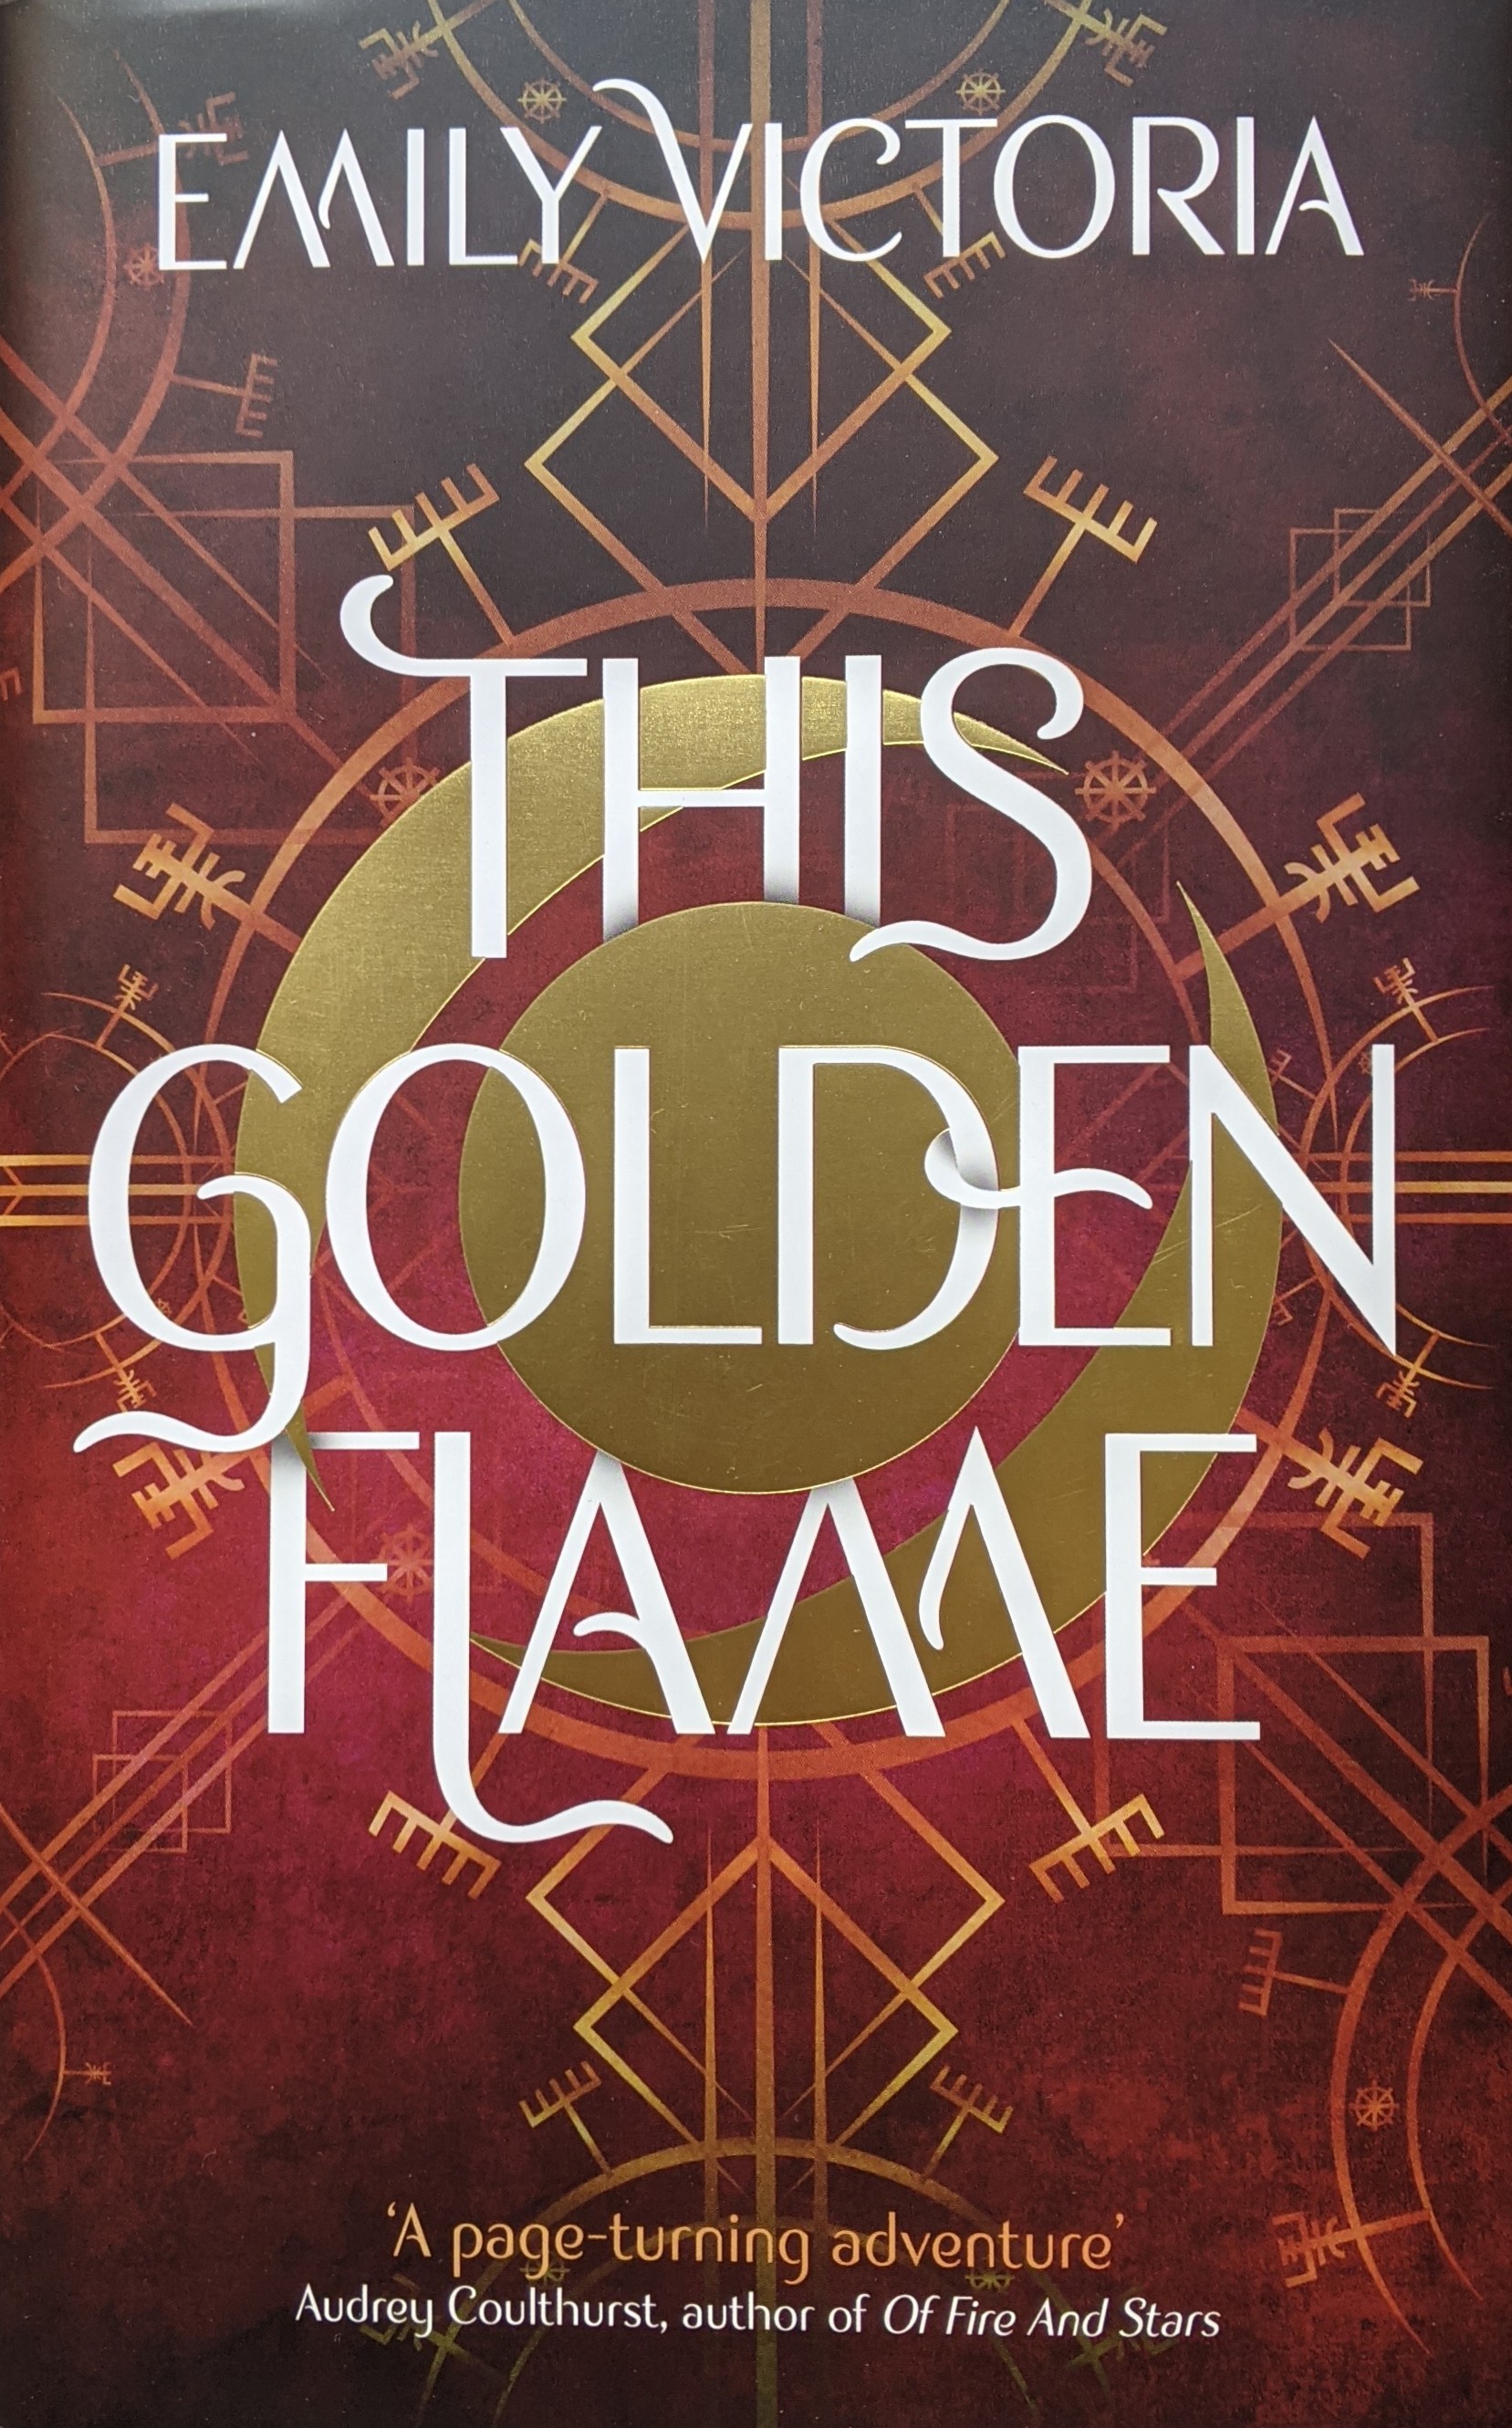 This Golden Flame by Emily Victoria